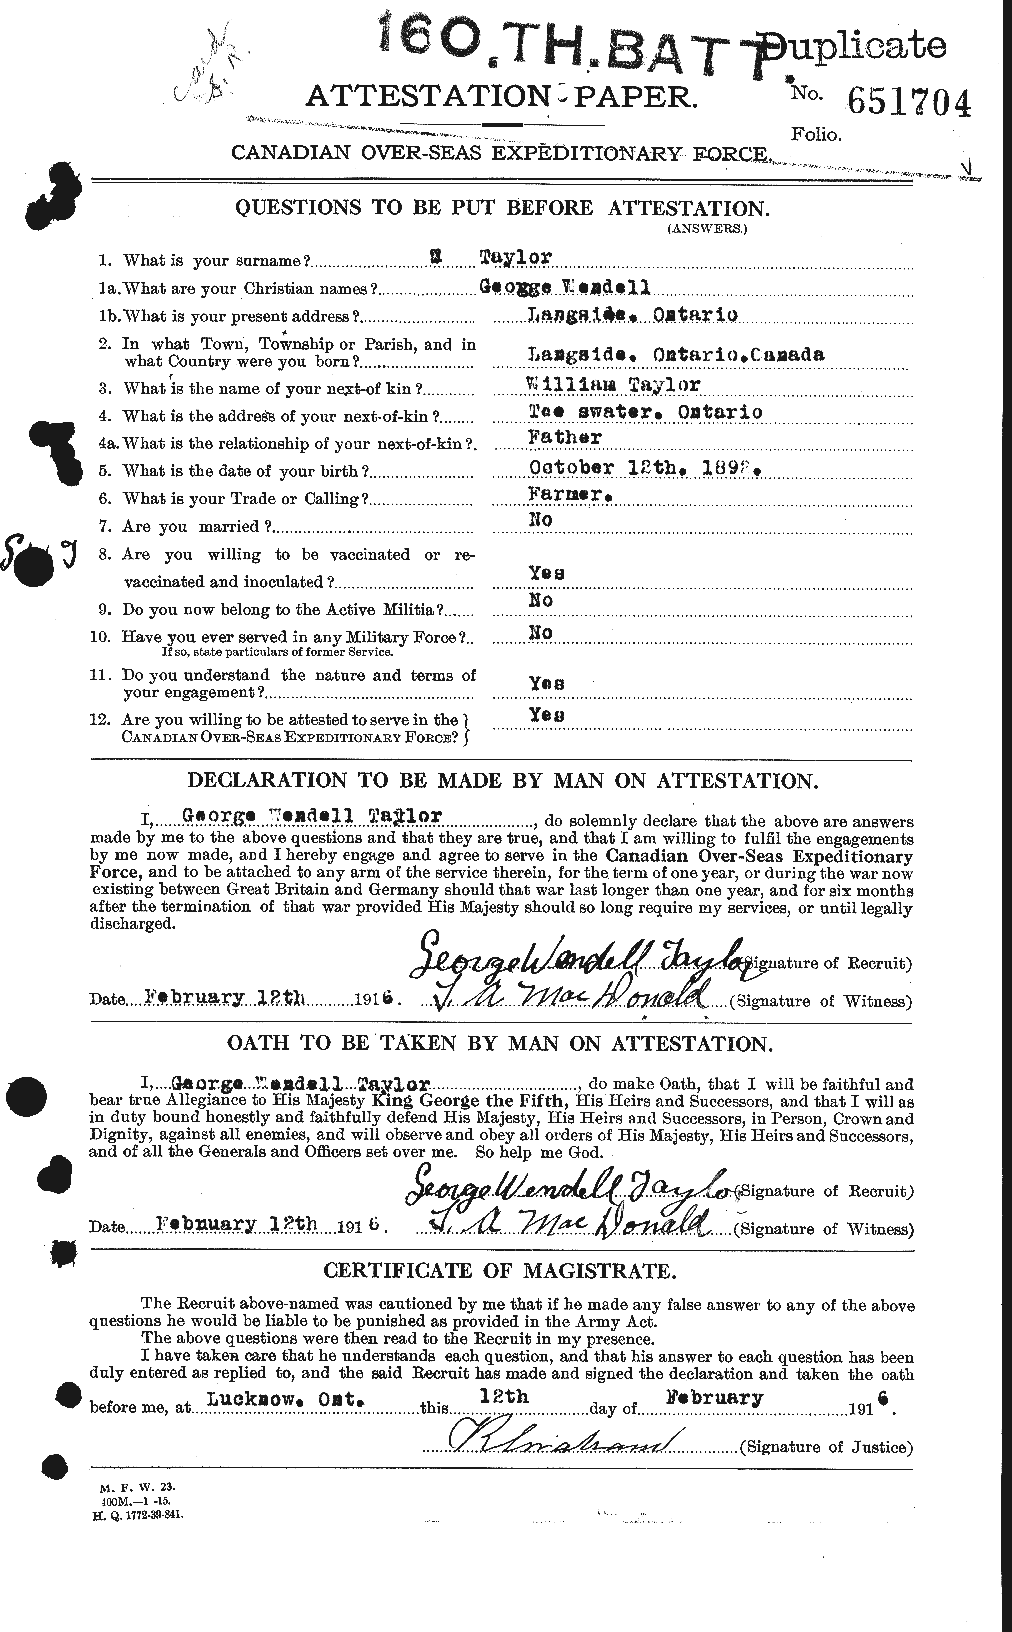 Personnel Records of the First World War - CEF 626364a